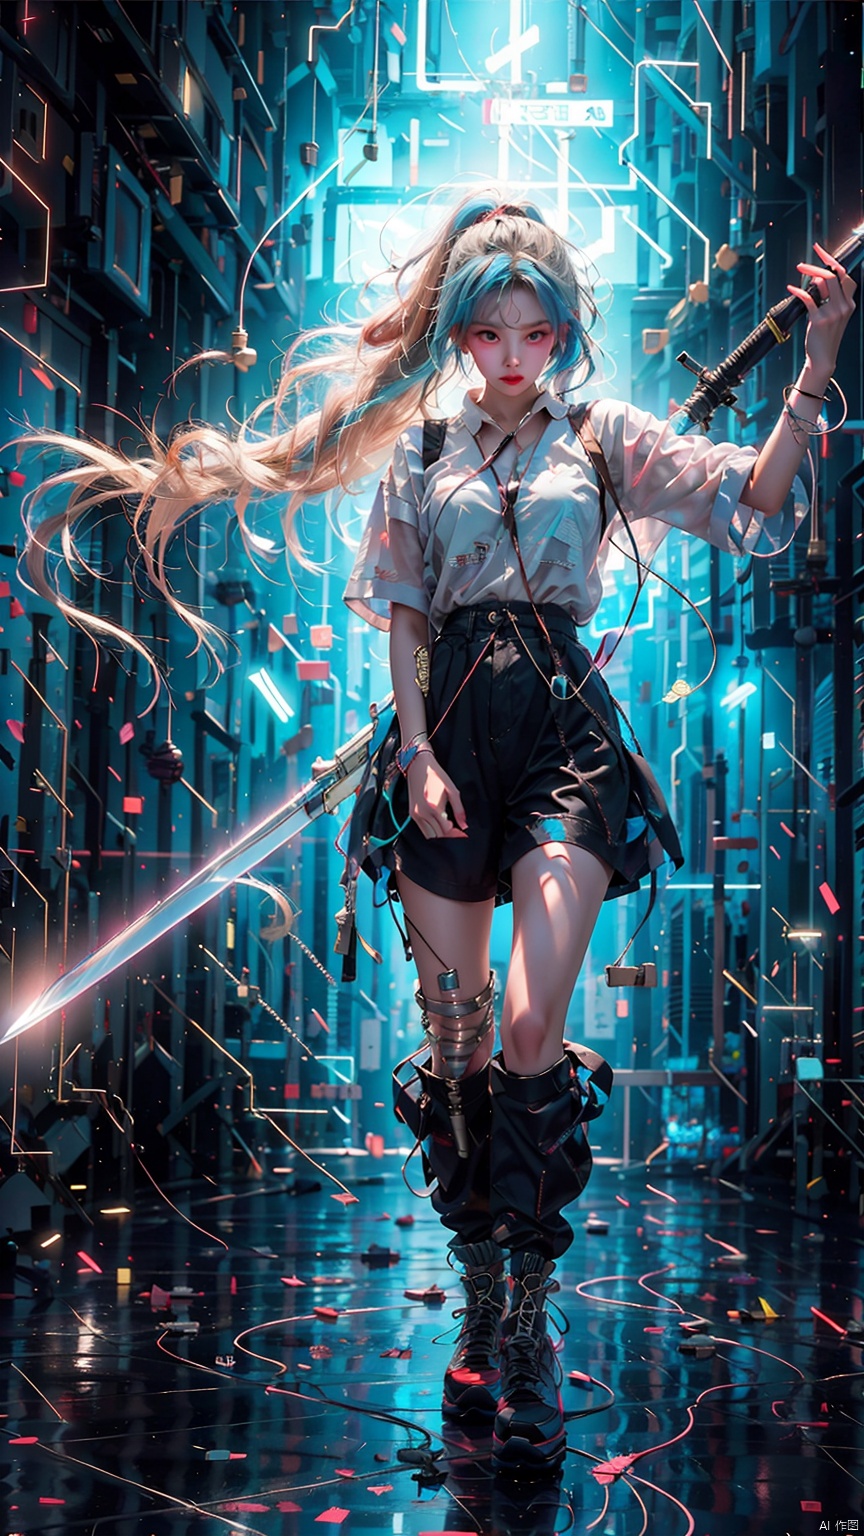  1 girl, loose clothes, (holding a samurai sword) (blue hair, blue eyes, three-dimensional facial features, big eyes, light makeup, lying silkworm), (loli height, standing on a mirrored stage, full body photo), (overhead view), (workwear pants, clothing - street hip-hop), (exquisite masterpiece), (holographic projection), (cyberpunk style), (mechanical modular background), (Luminous circuit) (Flashing neon light) (Blue illuminated background) (Background blurring treatment)